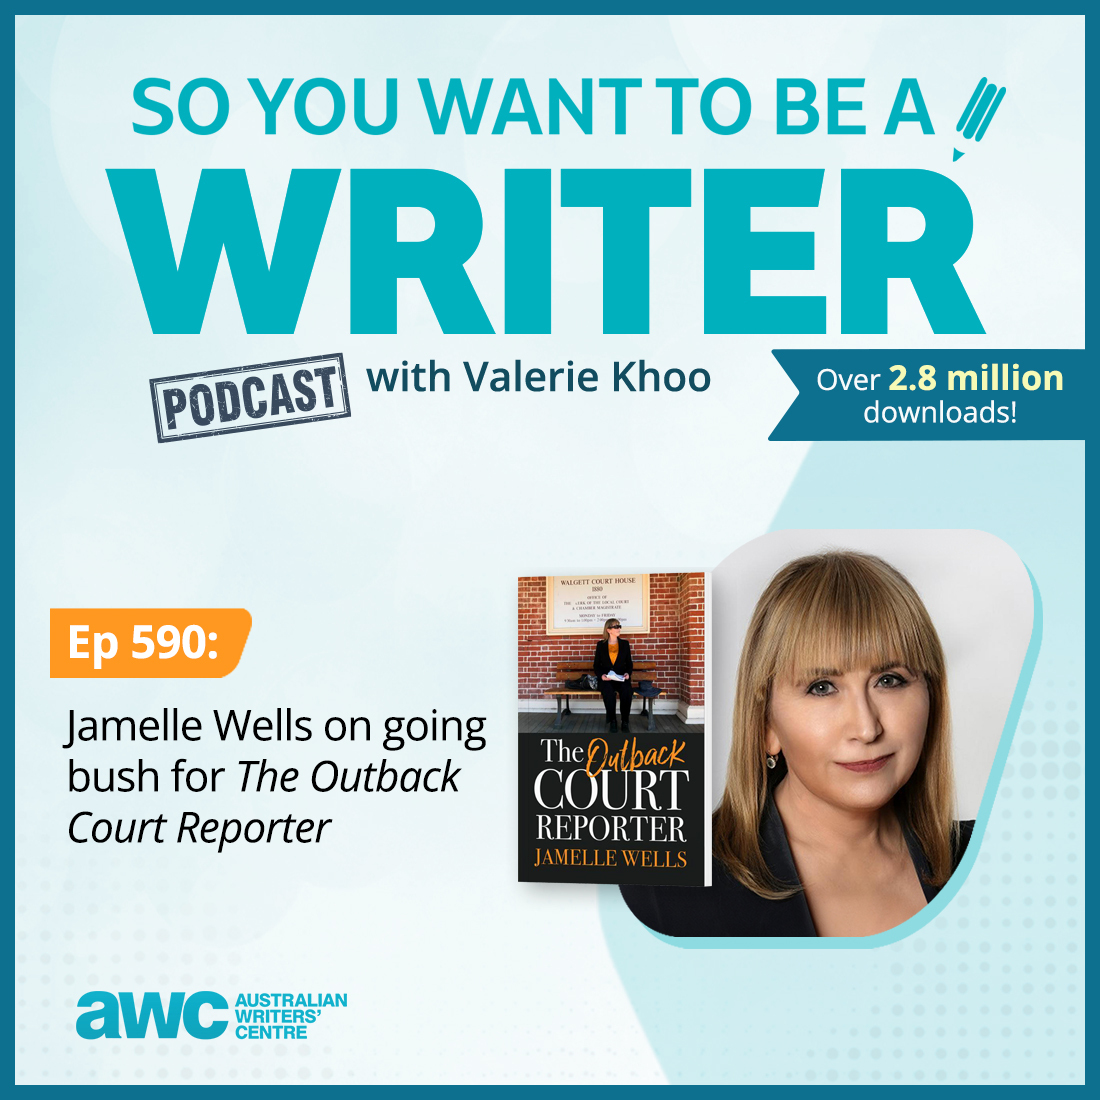 WRITER 590: Jamelle Wells on going bush for ’The Outback Court Reporter’.